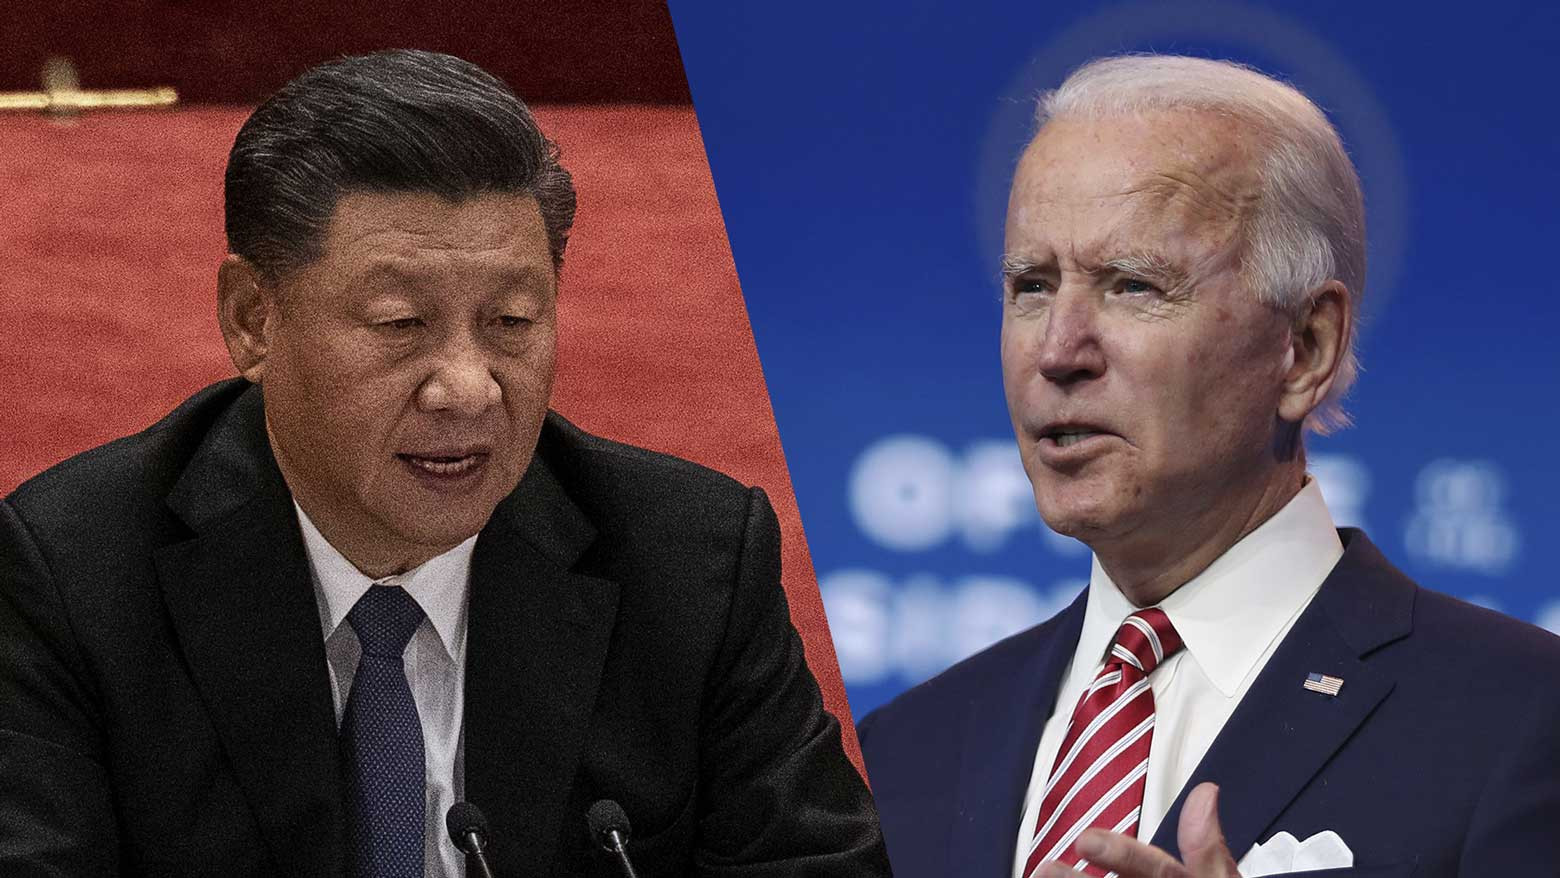 Experts talk US-China relations as Biden prepares to take office